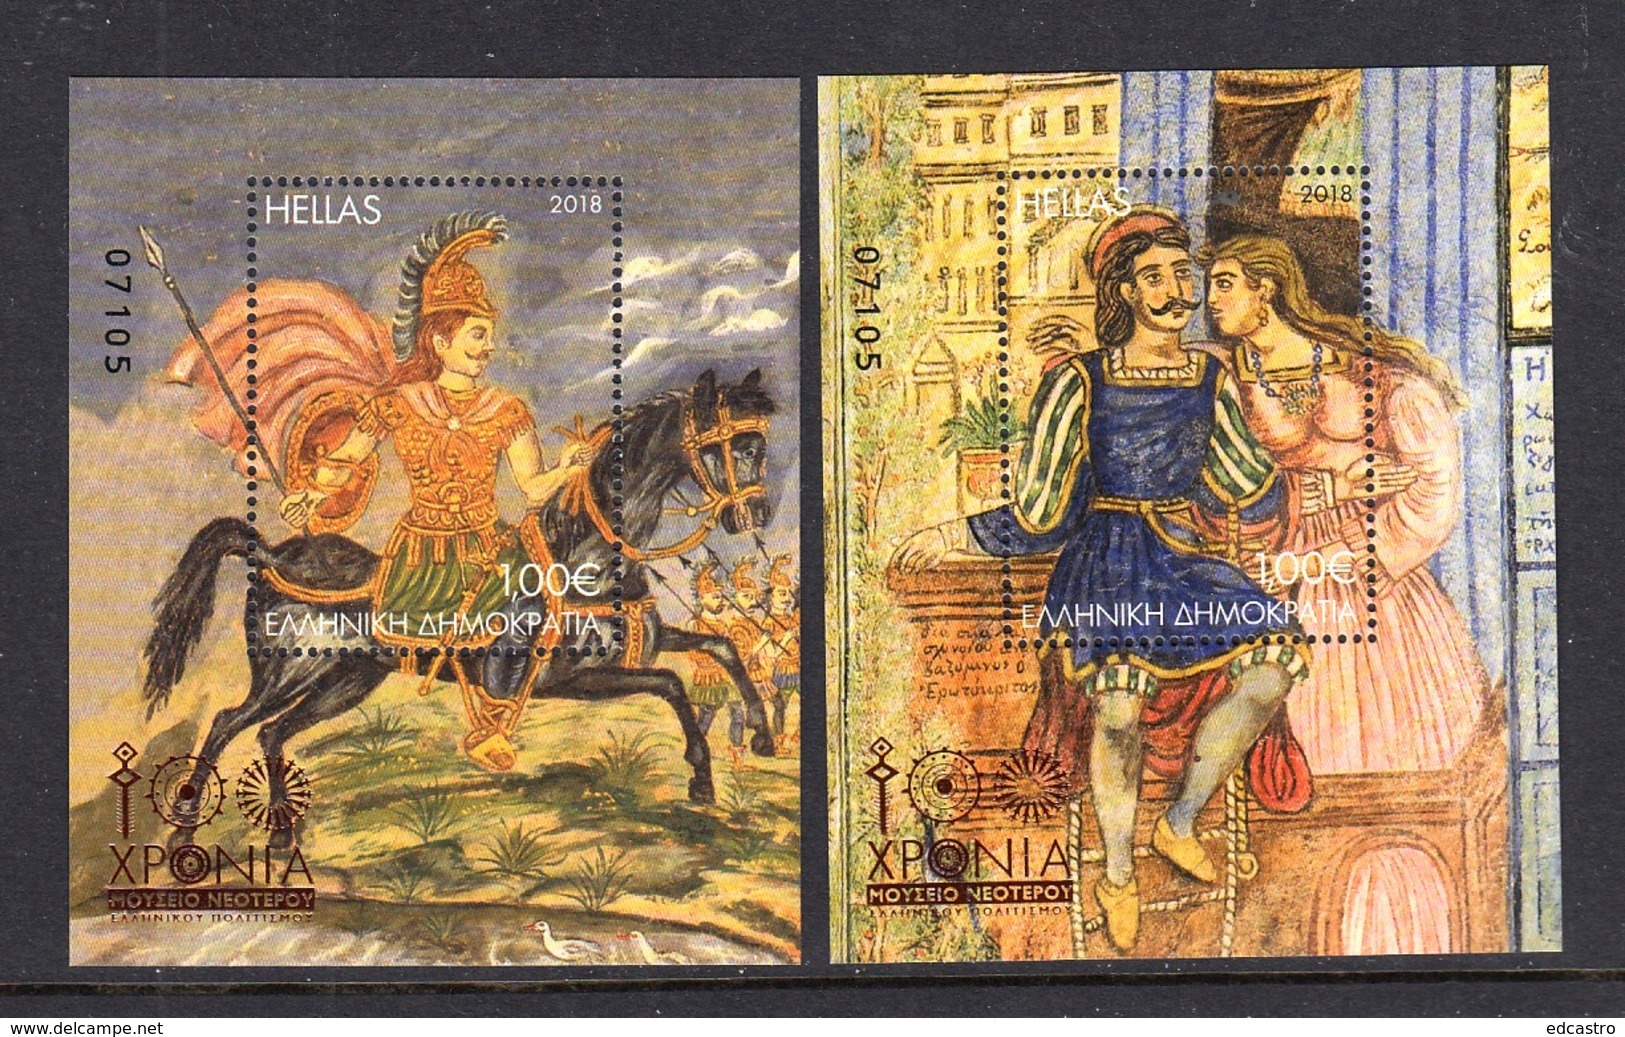 3.- GREECE 2018 TWO SOUVENIR SHEET - ANNIVERSARY - 100 YEAR OF THE MUSEUM OF MODERN GREEK CULTURE - Nuevos